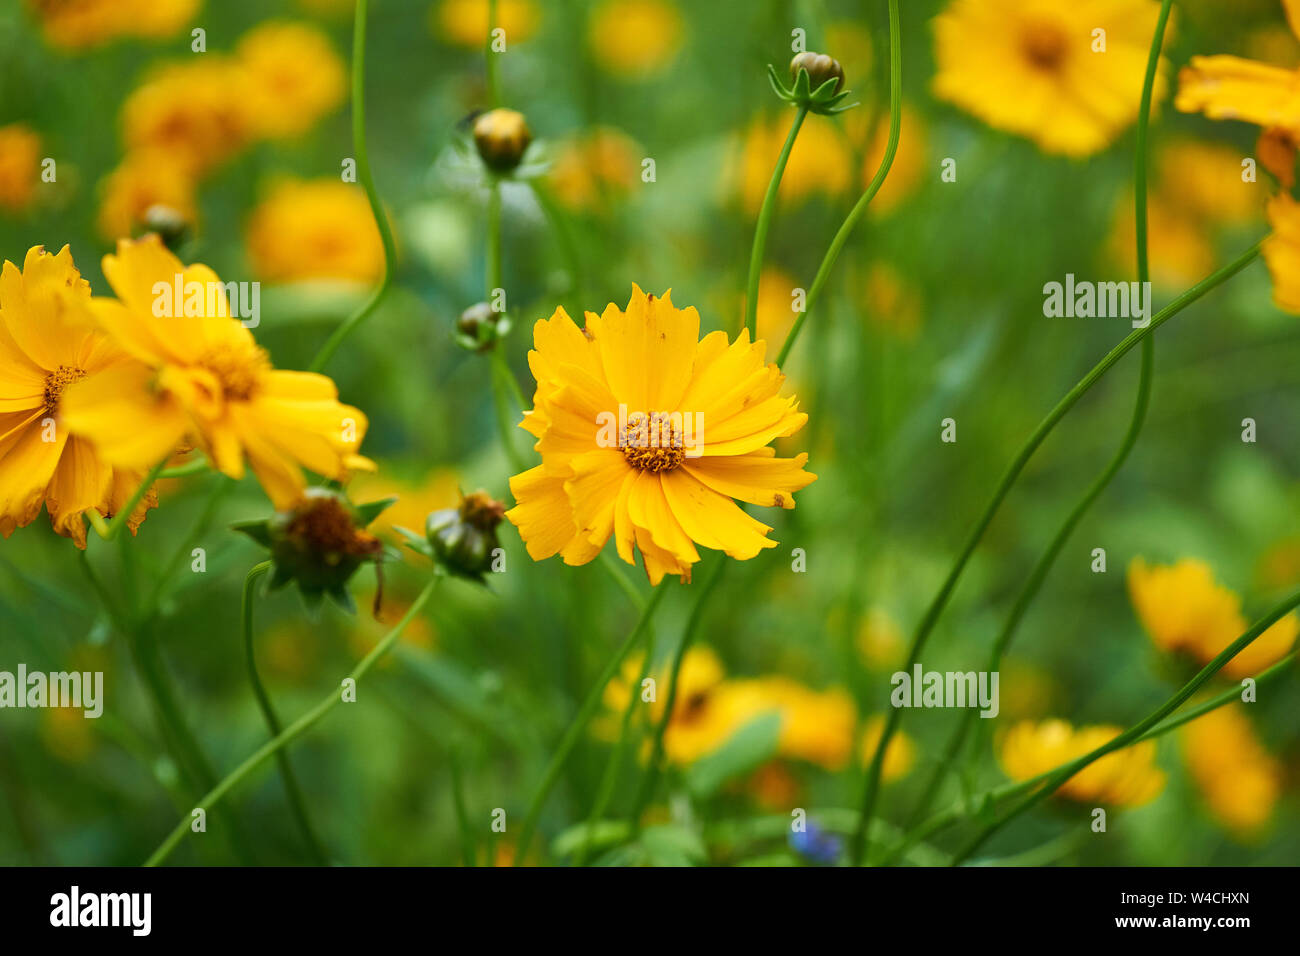 Many coreopsis lanceolata (tickseed, which look like yellow cosmos) flowers bloom in a flower patch on a summer day. Stock Photo